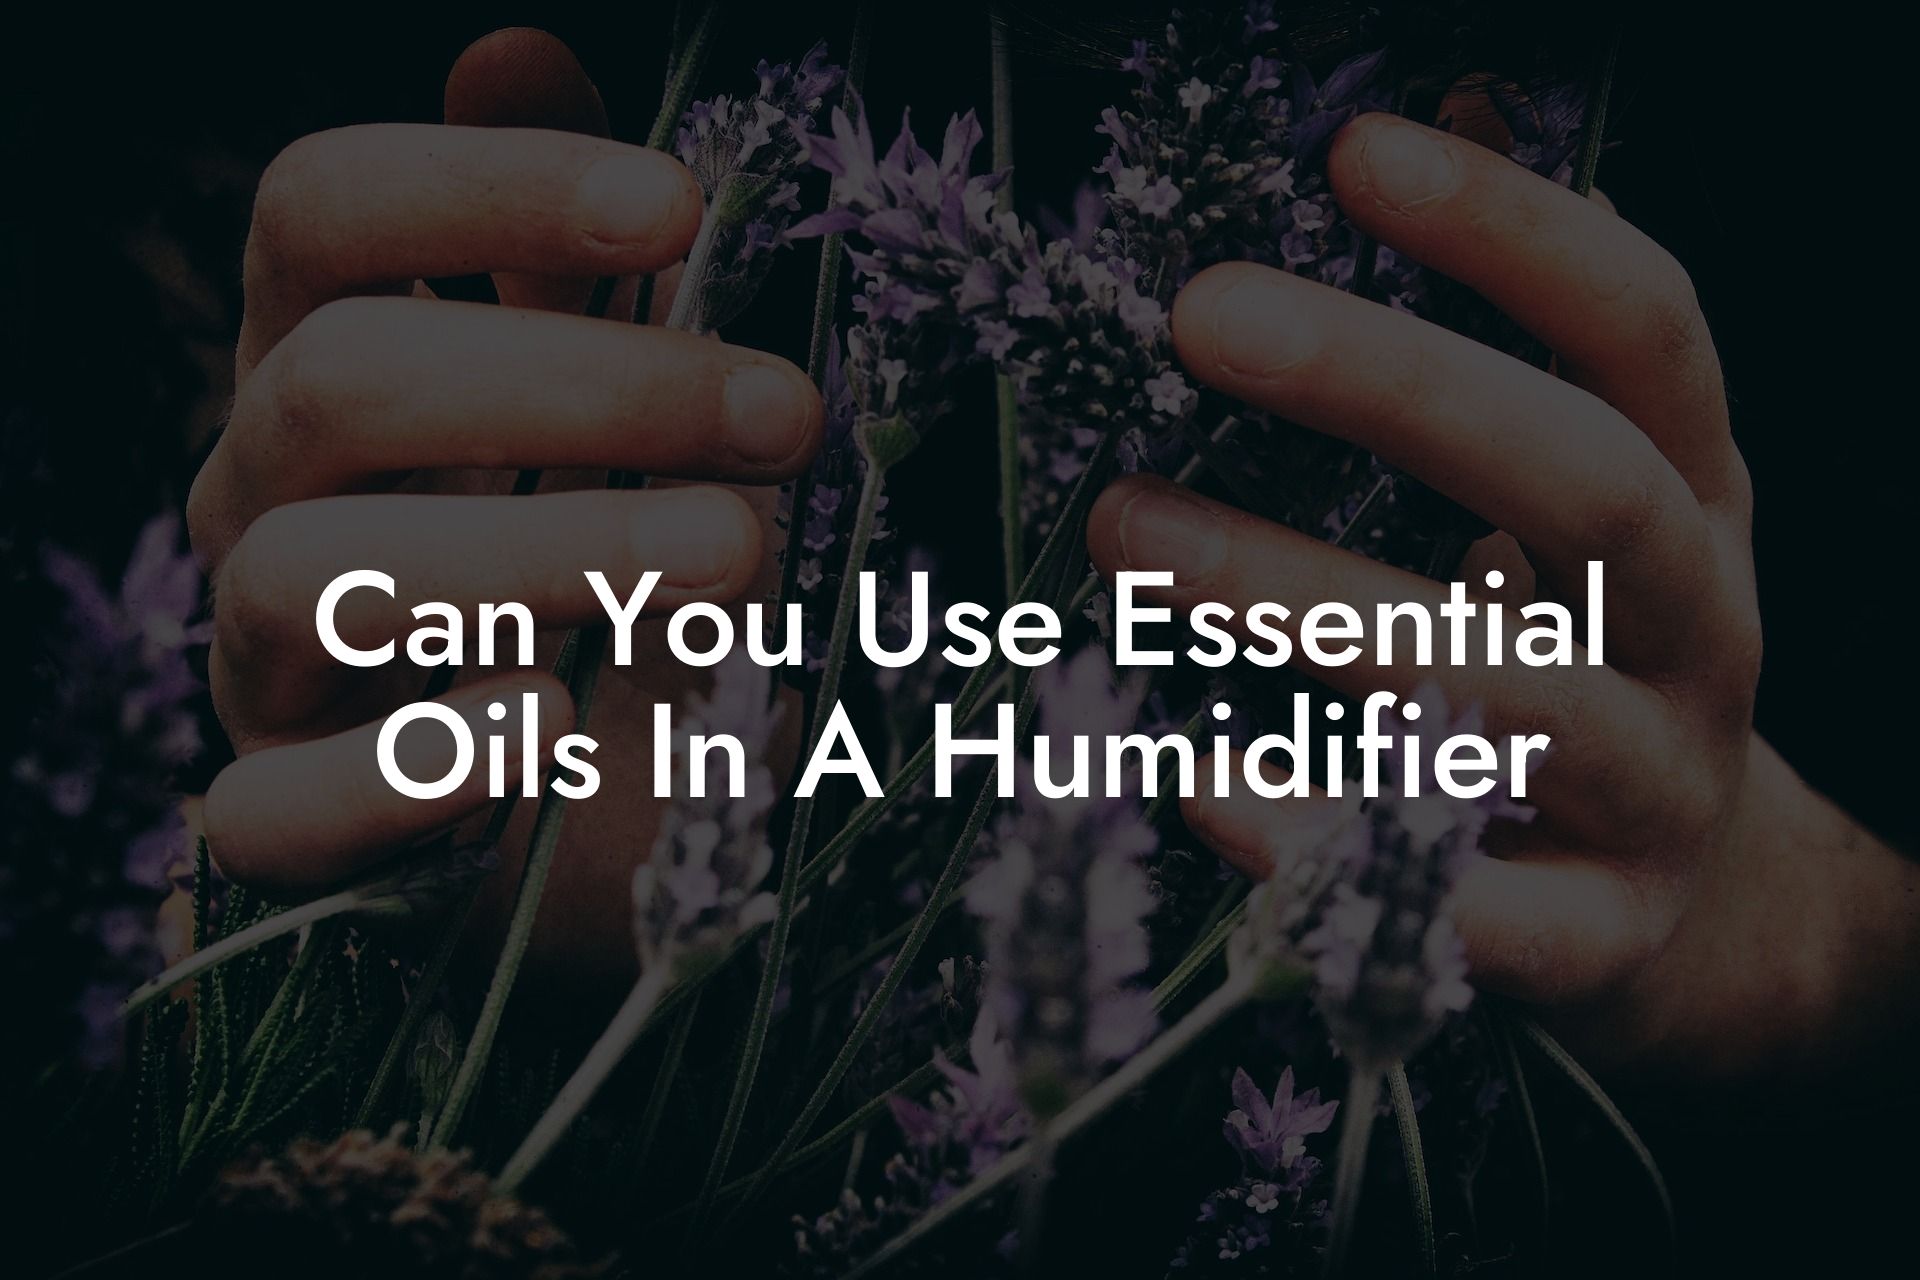 Can You Use Essential Oils In A Humidifier